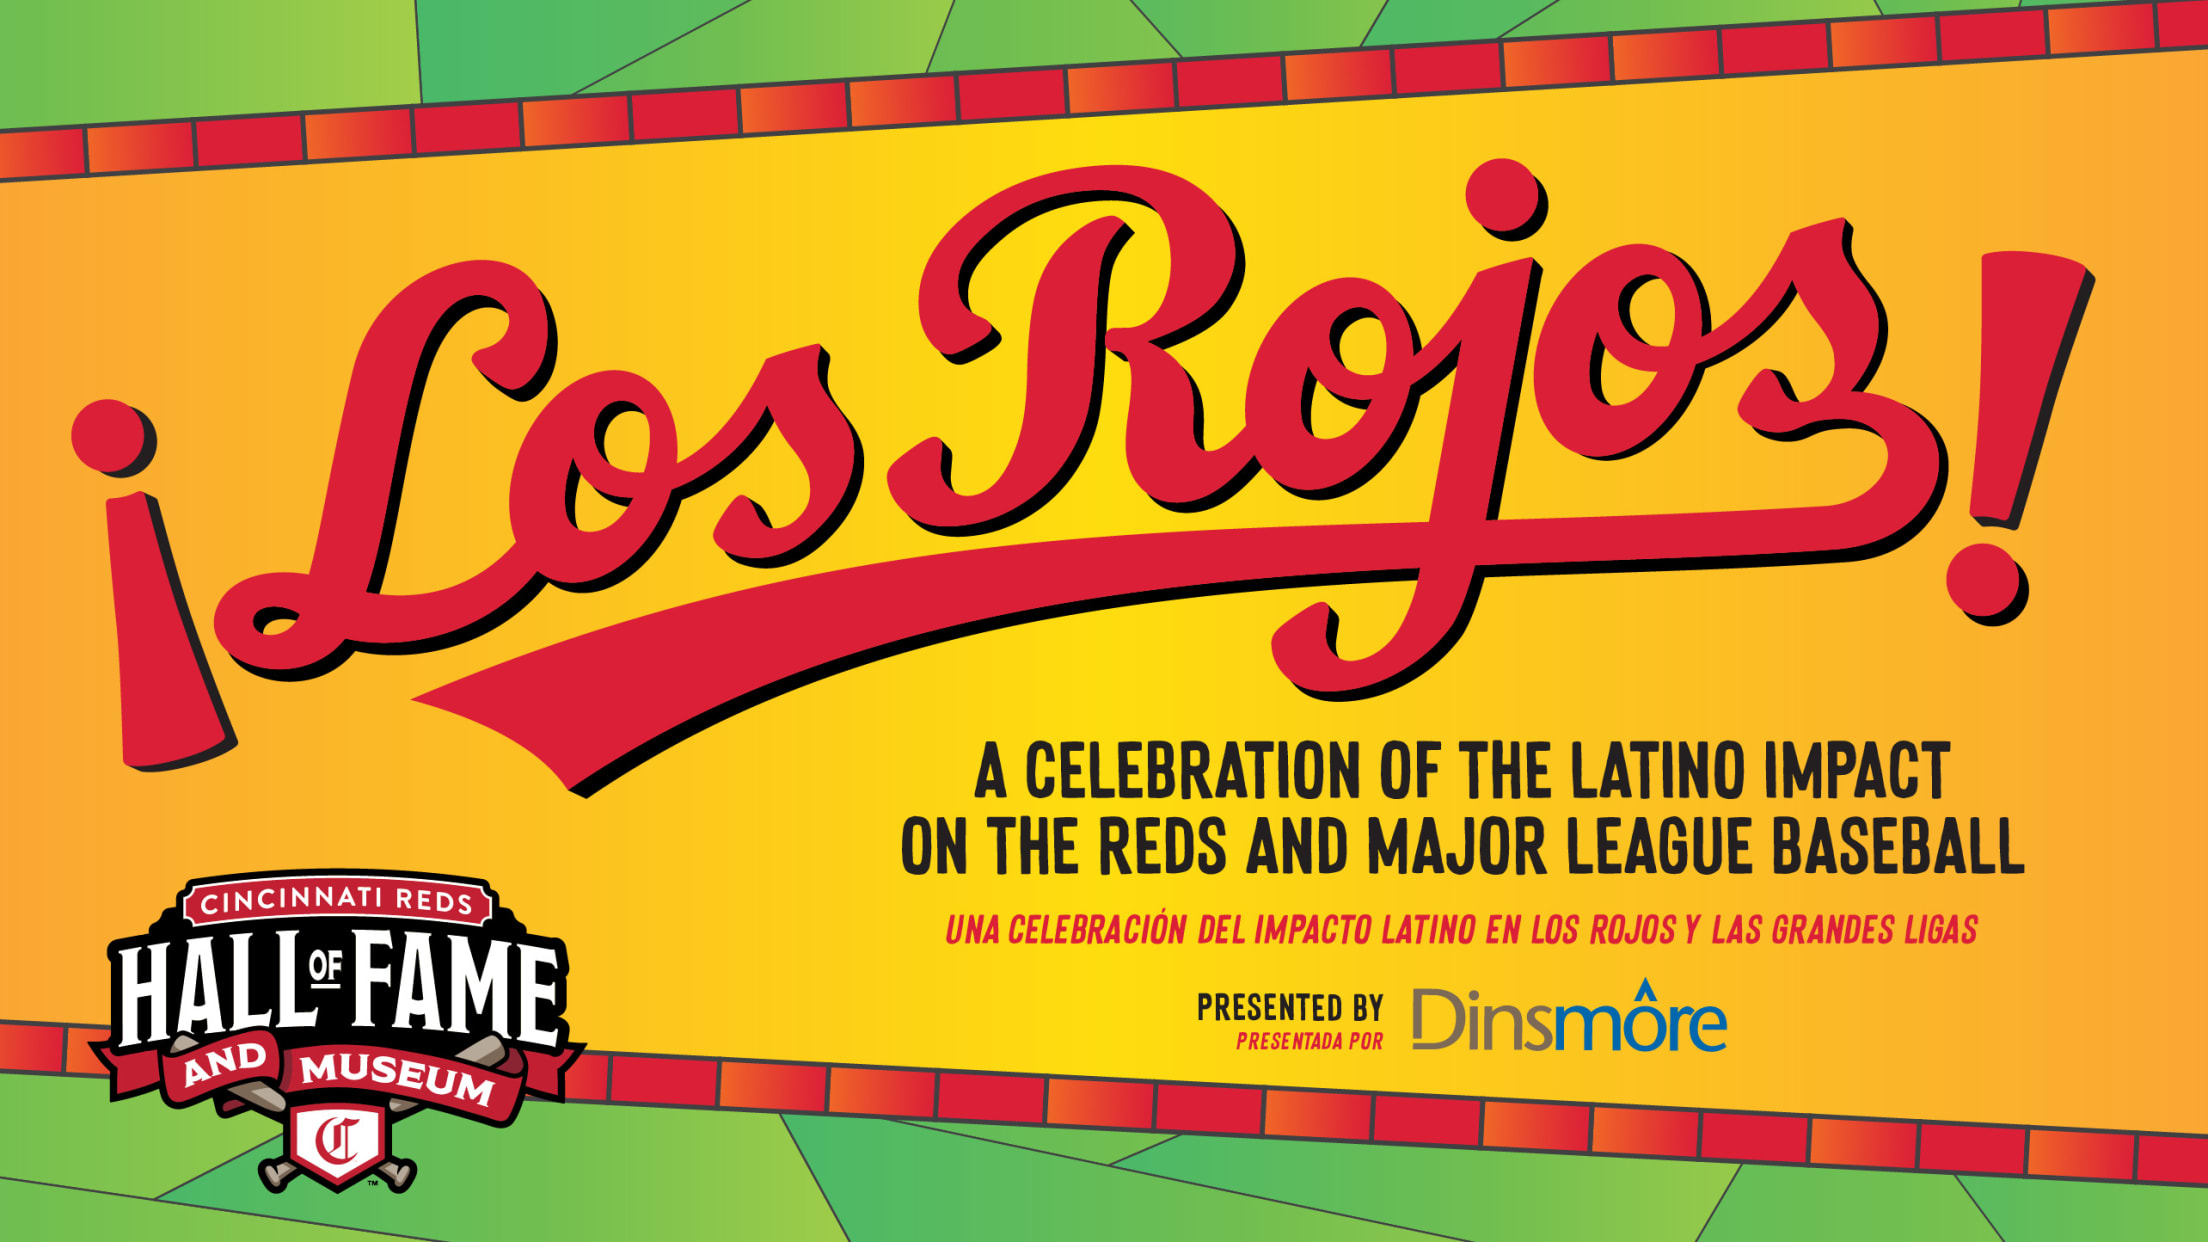 Los Rojos! A Celebration of Latino Impact on the Reds and Major